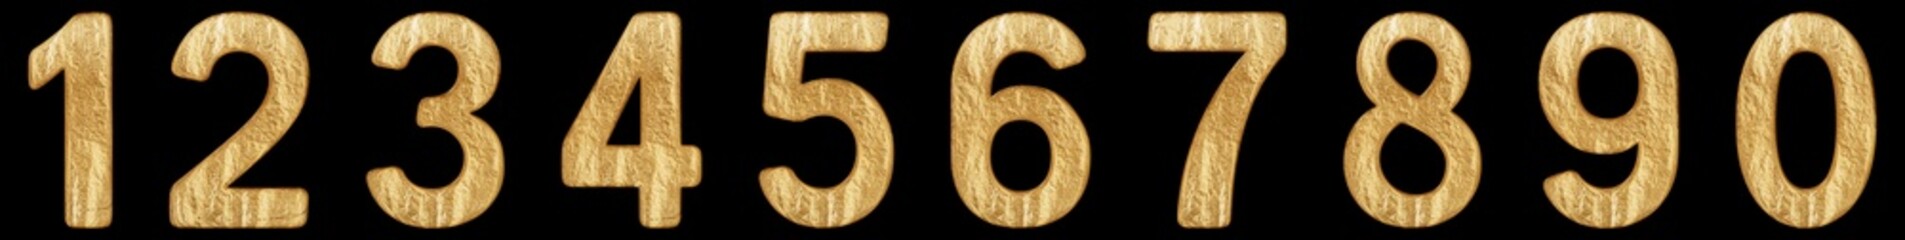 Set of arabic numbers, gold texture, isolated on black background, 3d illustration